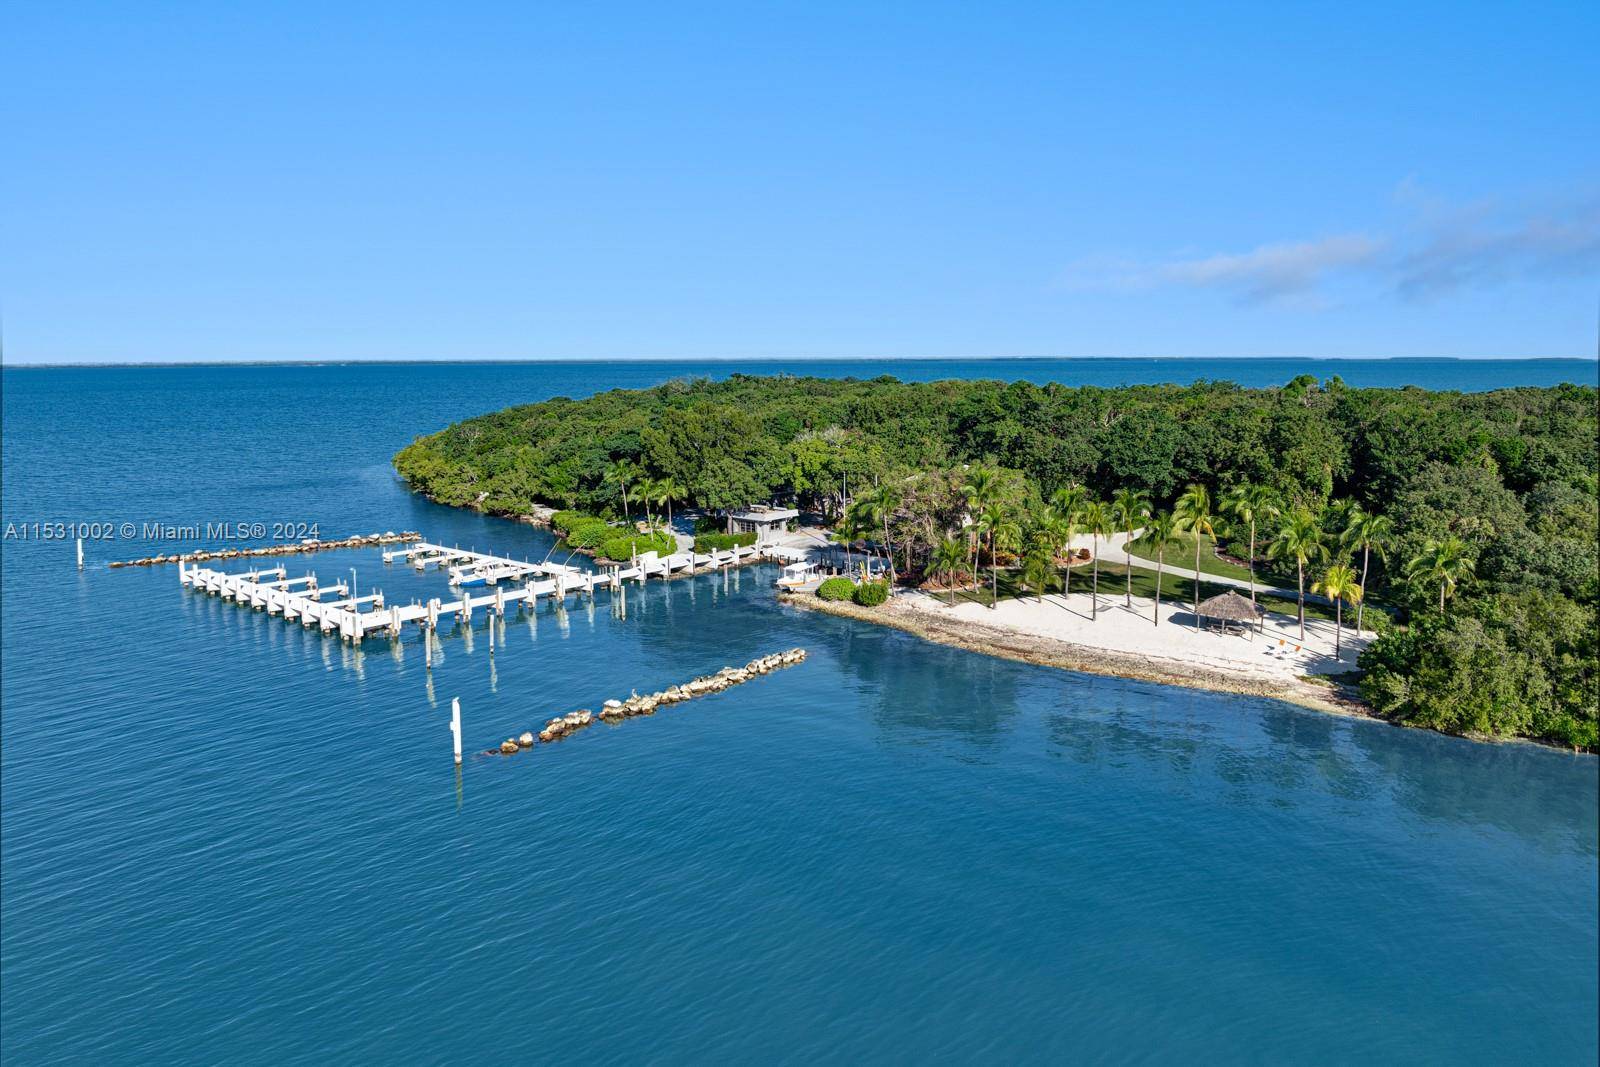 Nestled amidst the waters of the Florida Keys, an unparalleled opportunity awaits your very own 26 acre Private Island plus an additional waterfront mainland home within Ocean Reef Club.